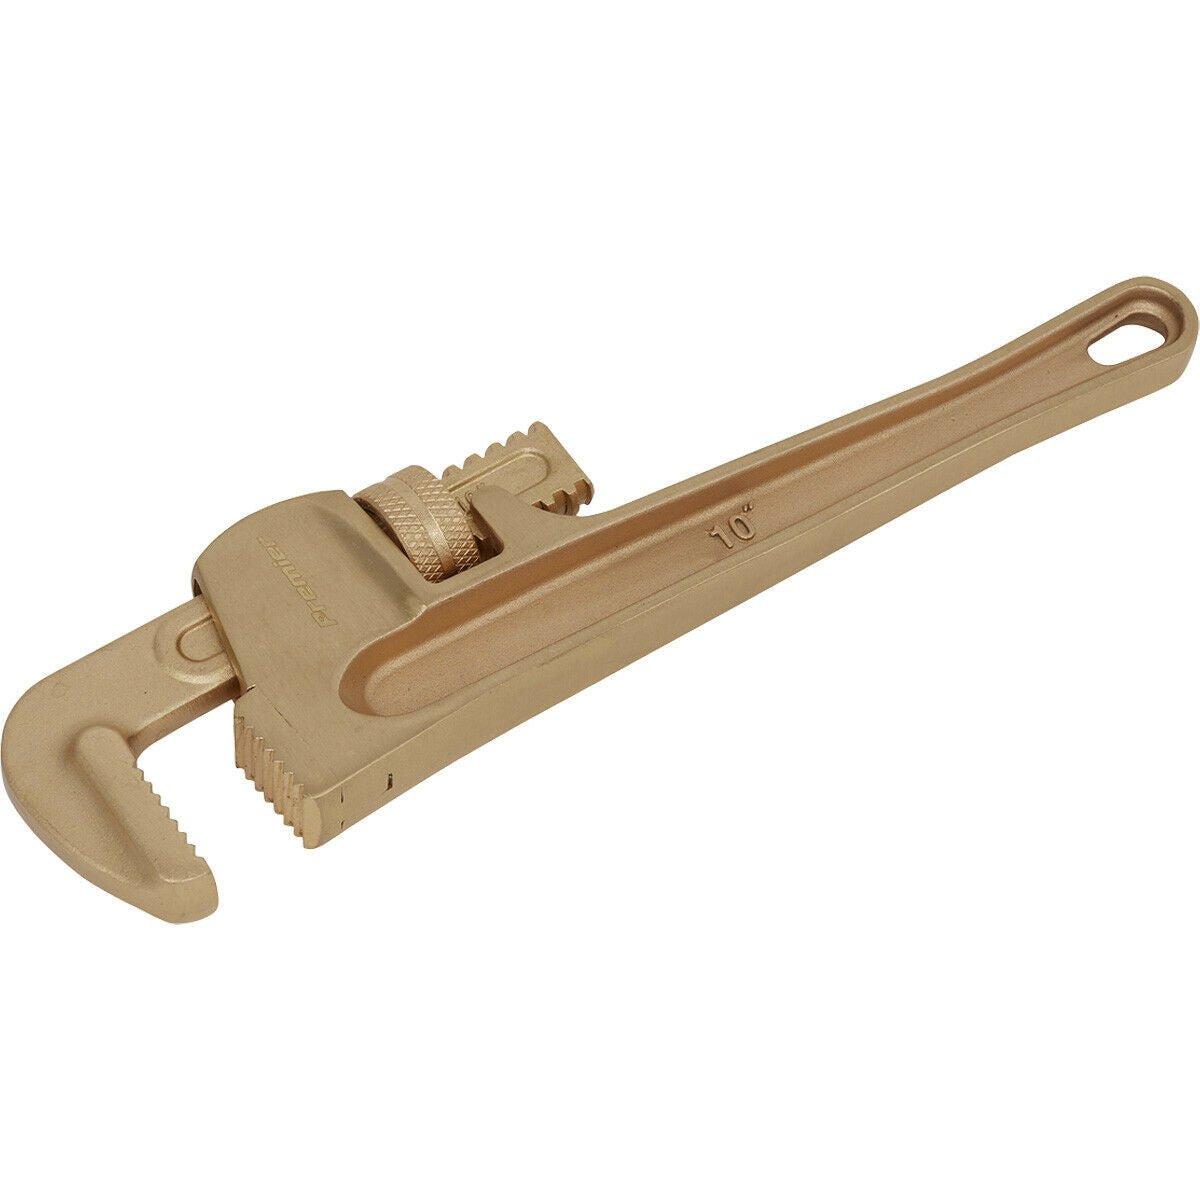 250mm Non-Sparking Adjustable Pipe Wrench - 45mm Jaw Capacity - Beryllium Copper